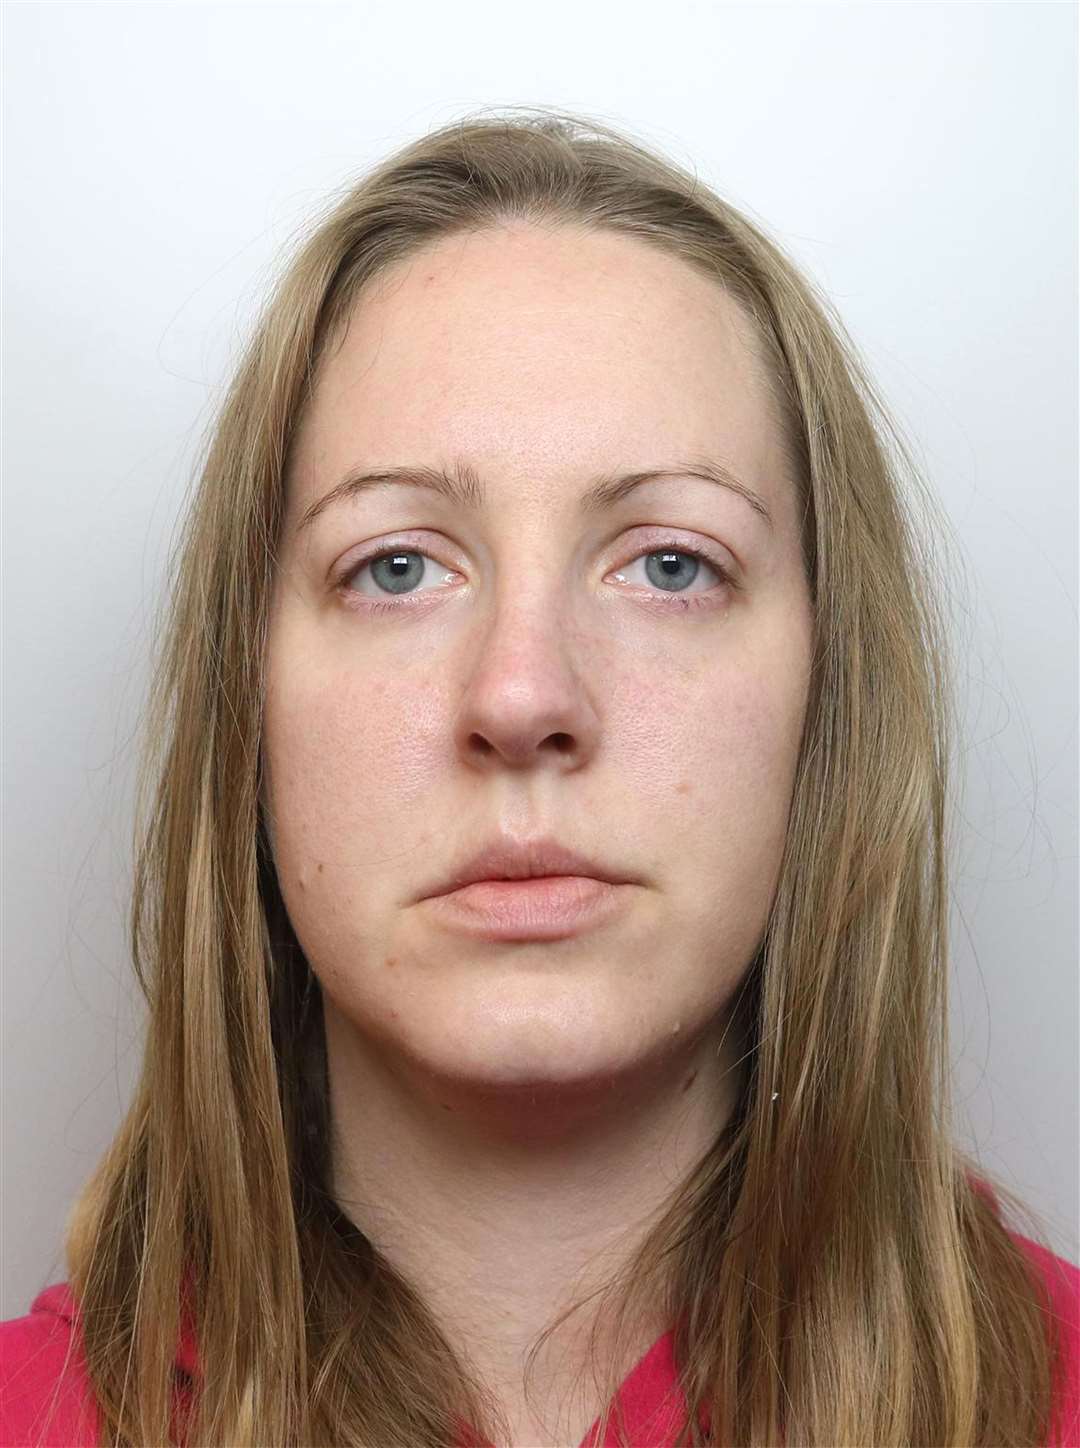 Lucy Letby refused to attend her sentencing hearing at Manchester Crown Court (Cheshire Constabulary/PA)